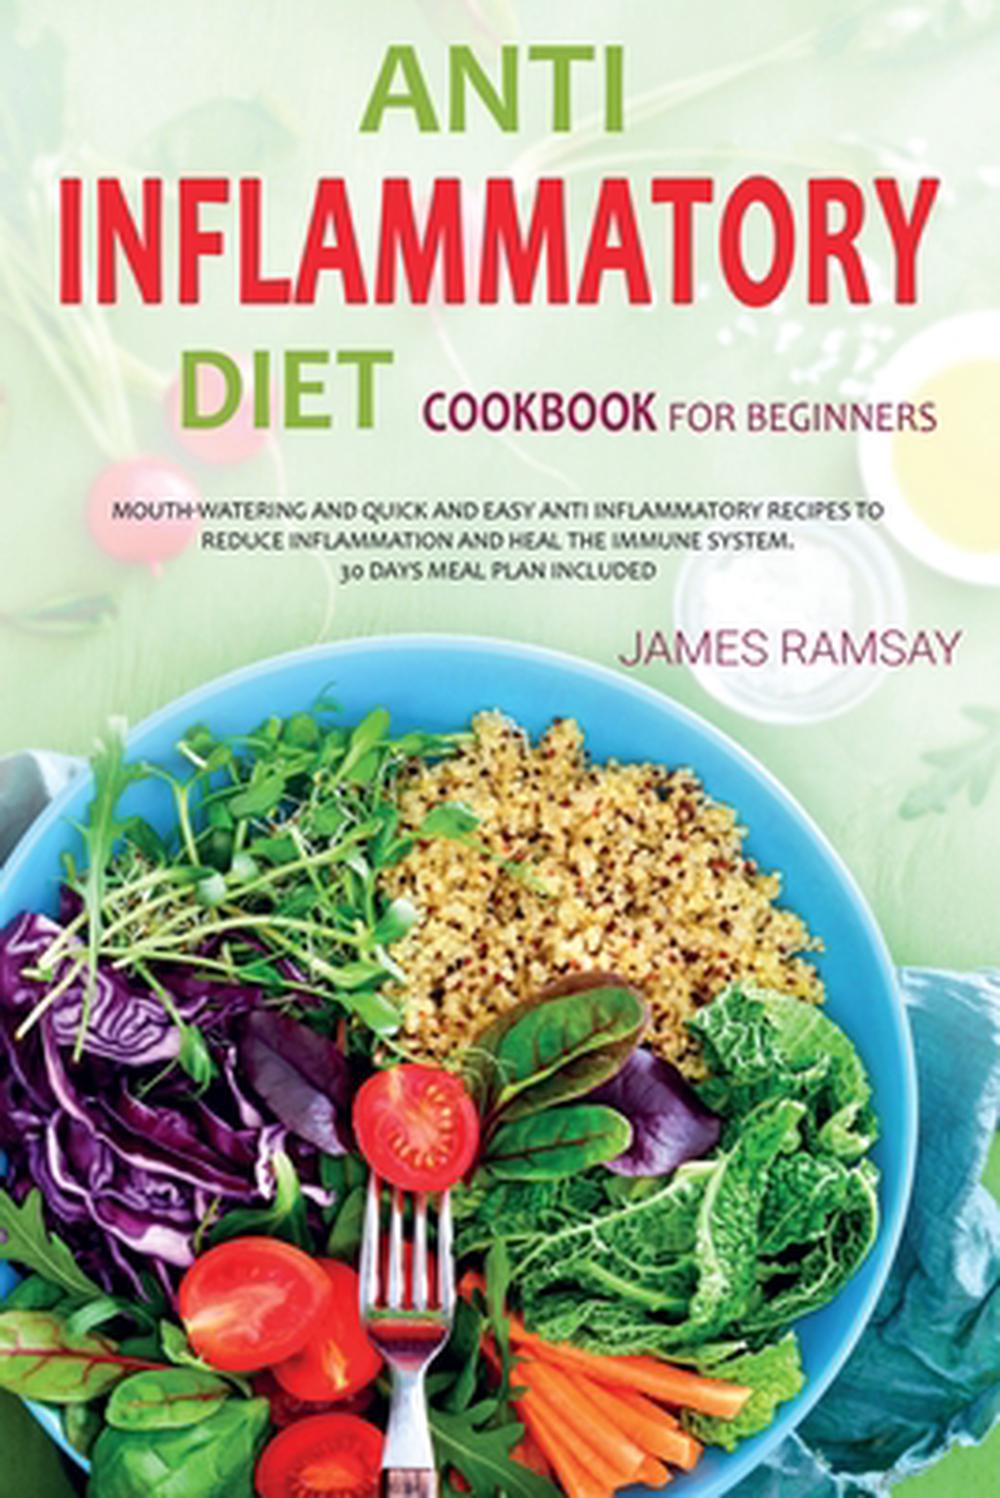 Anti Inflammatory Diet for Beginners by James Ramsay ...